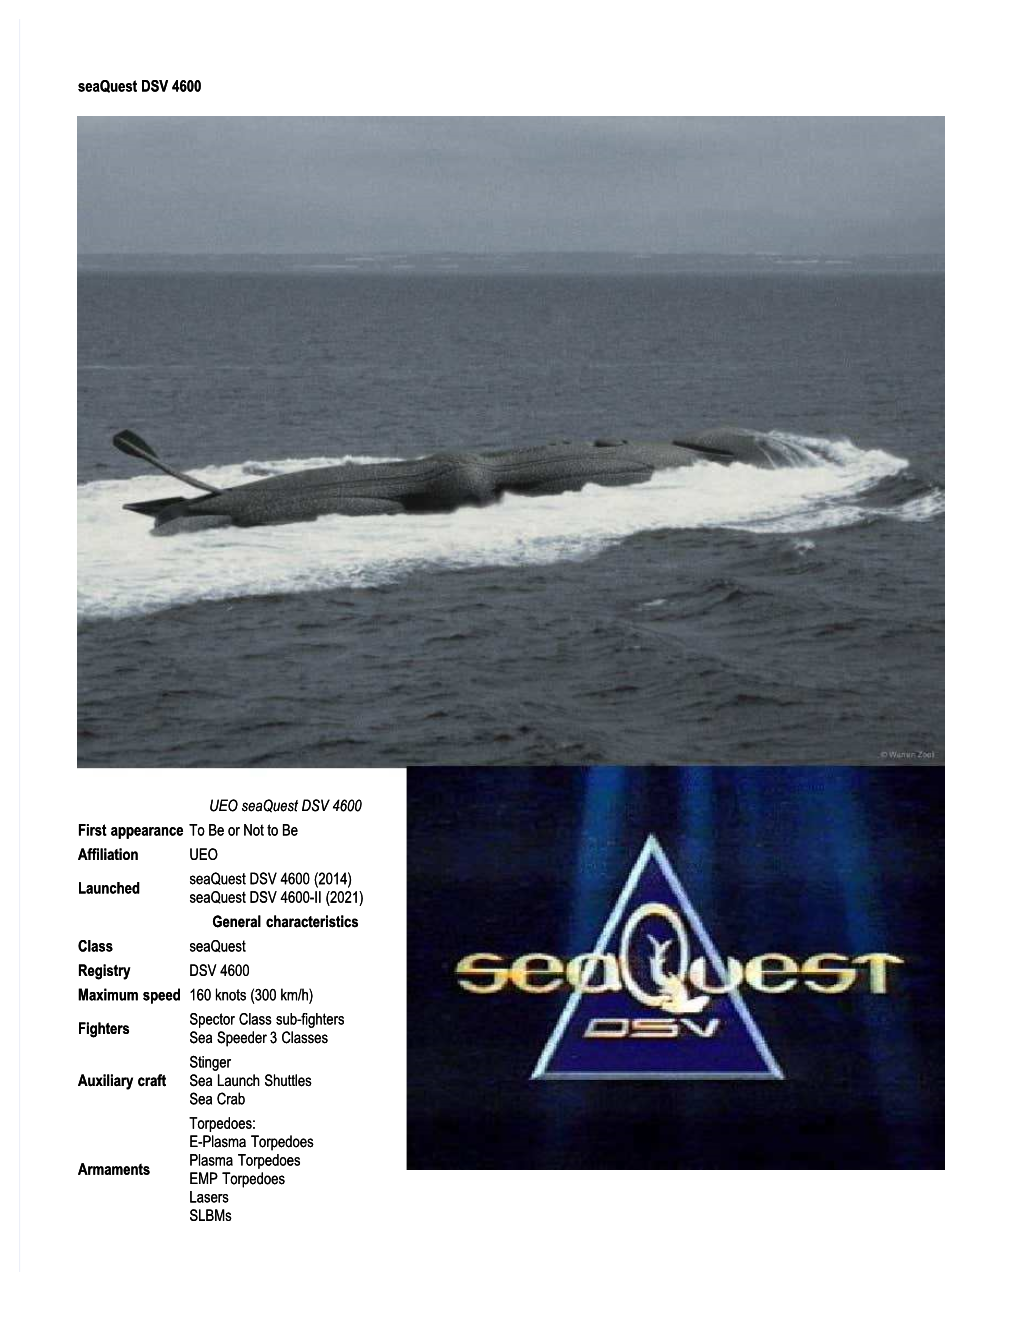 Seaquest DSV 4600 UEO Seaquest DSV 4600 First Appearance to Be Or Not to Be Affiliation UEO Launched Seaquest DSV 4600 (2014)